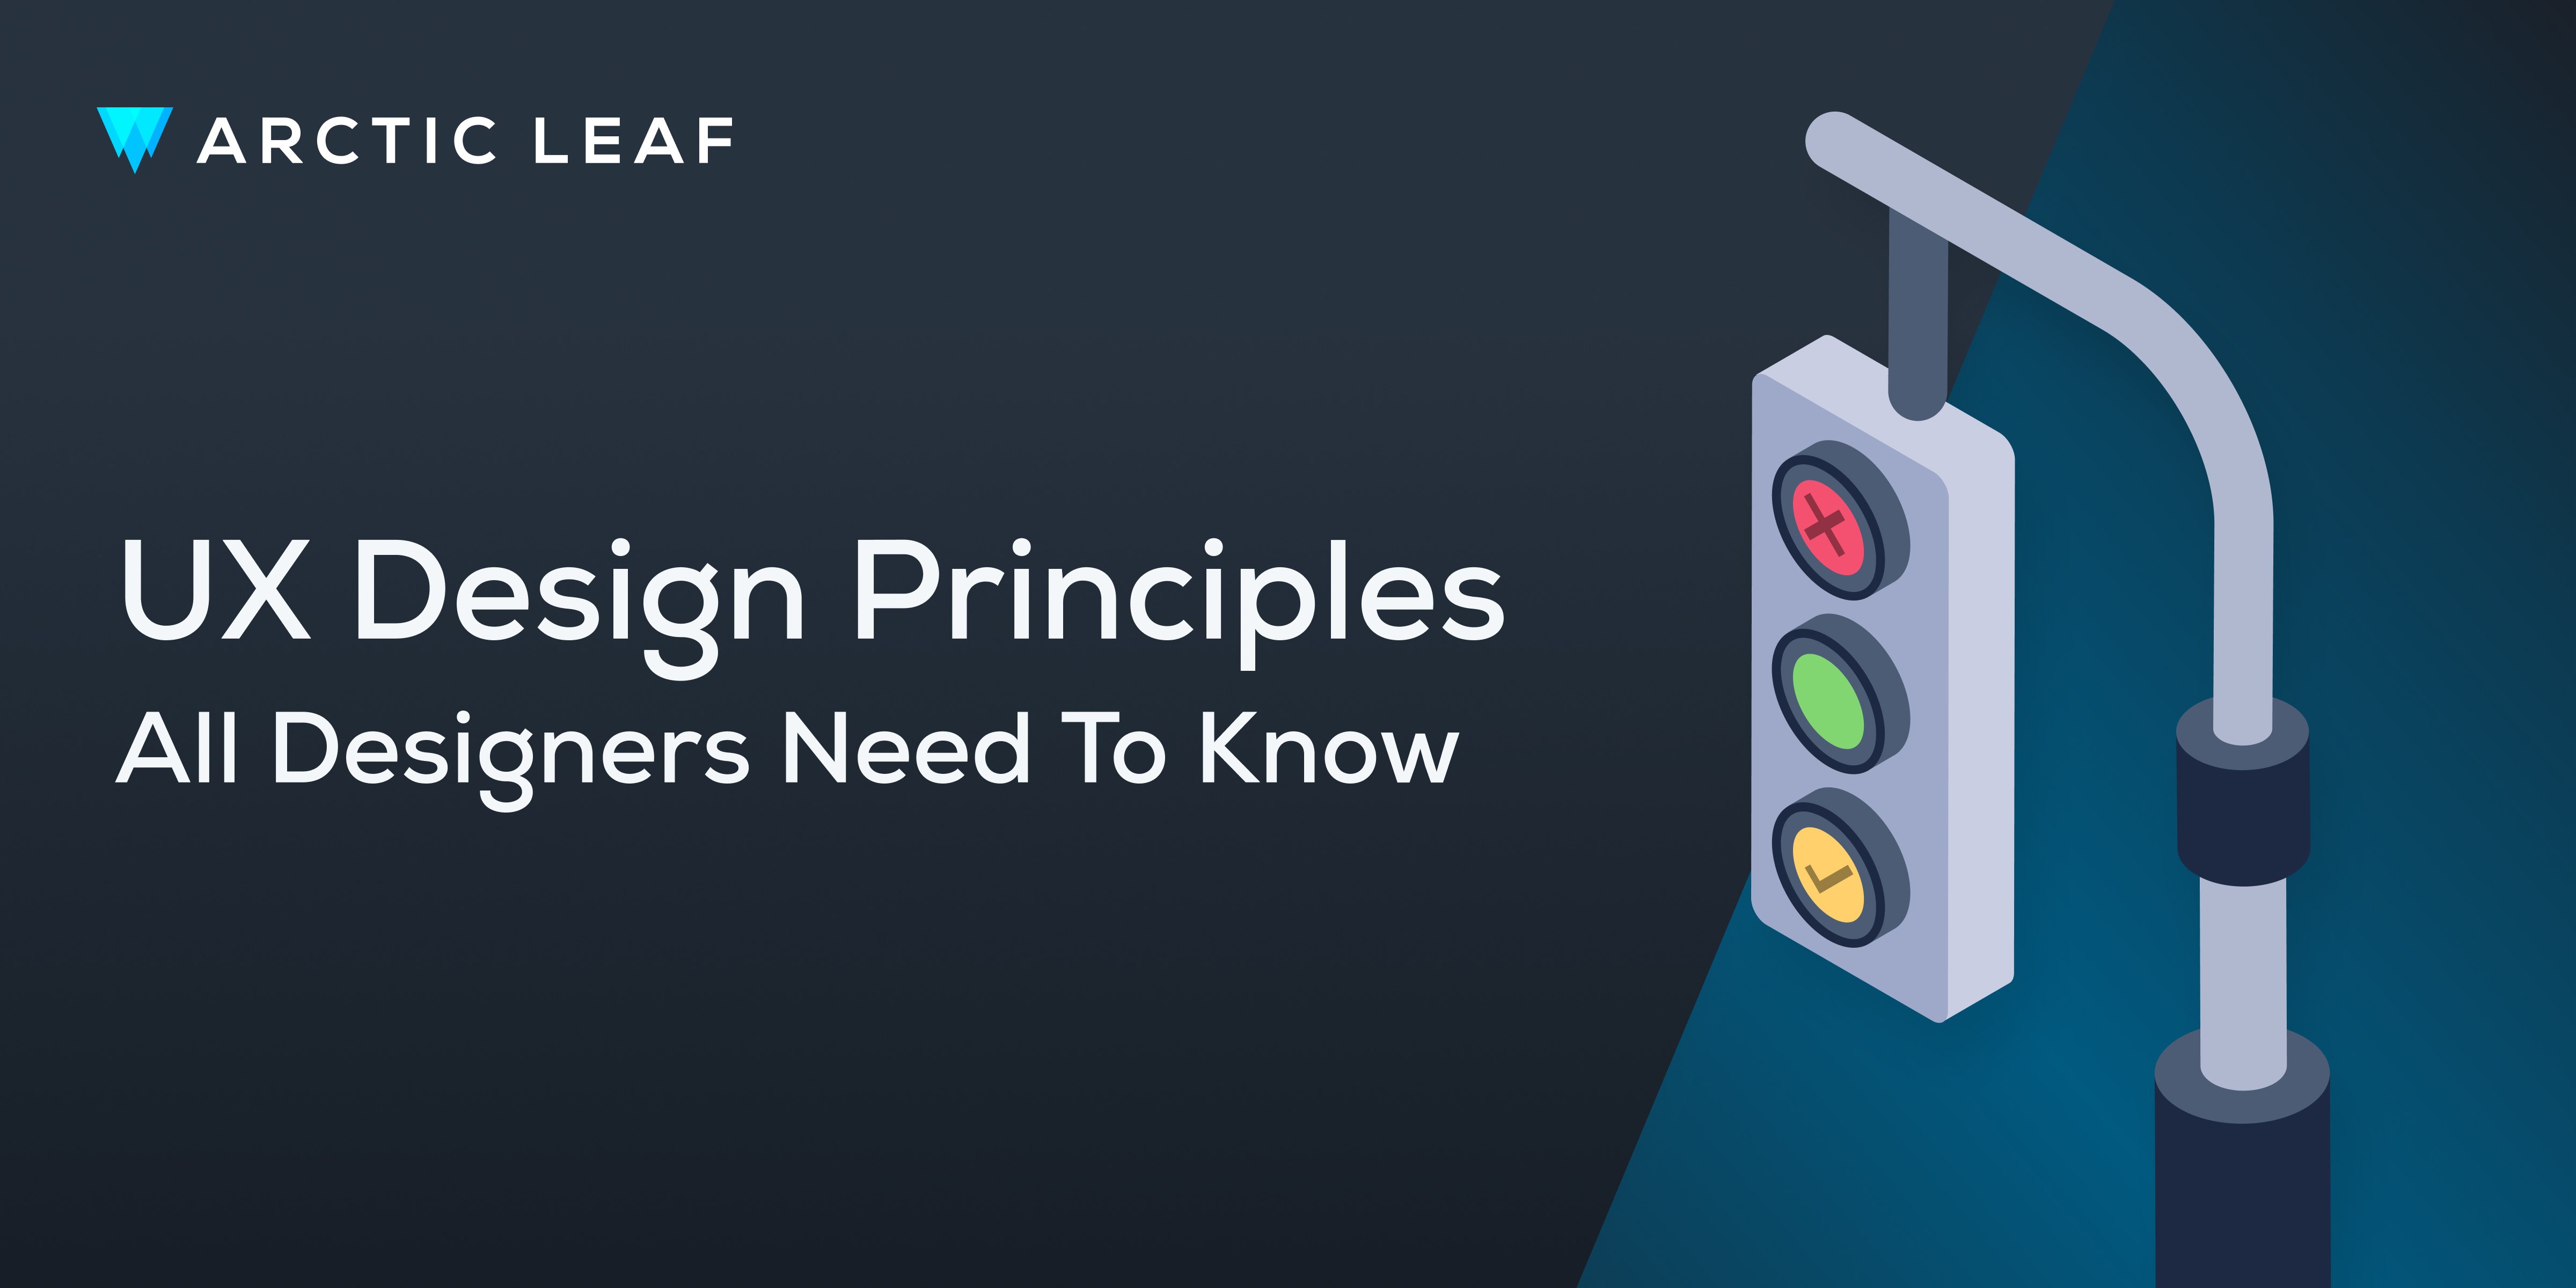 UX Design Principles web designers need to know 